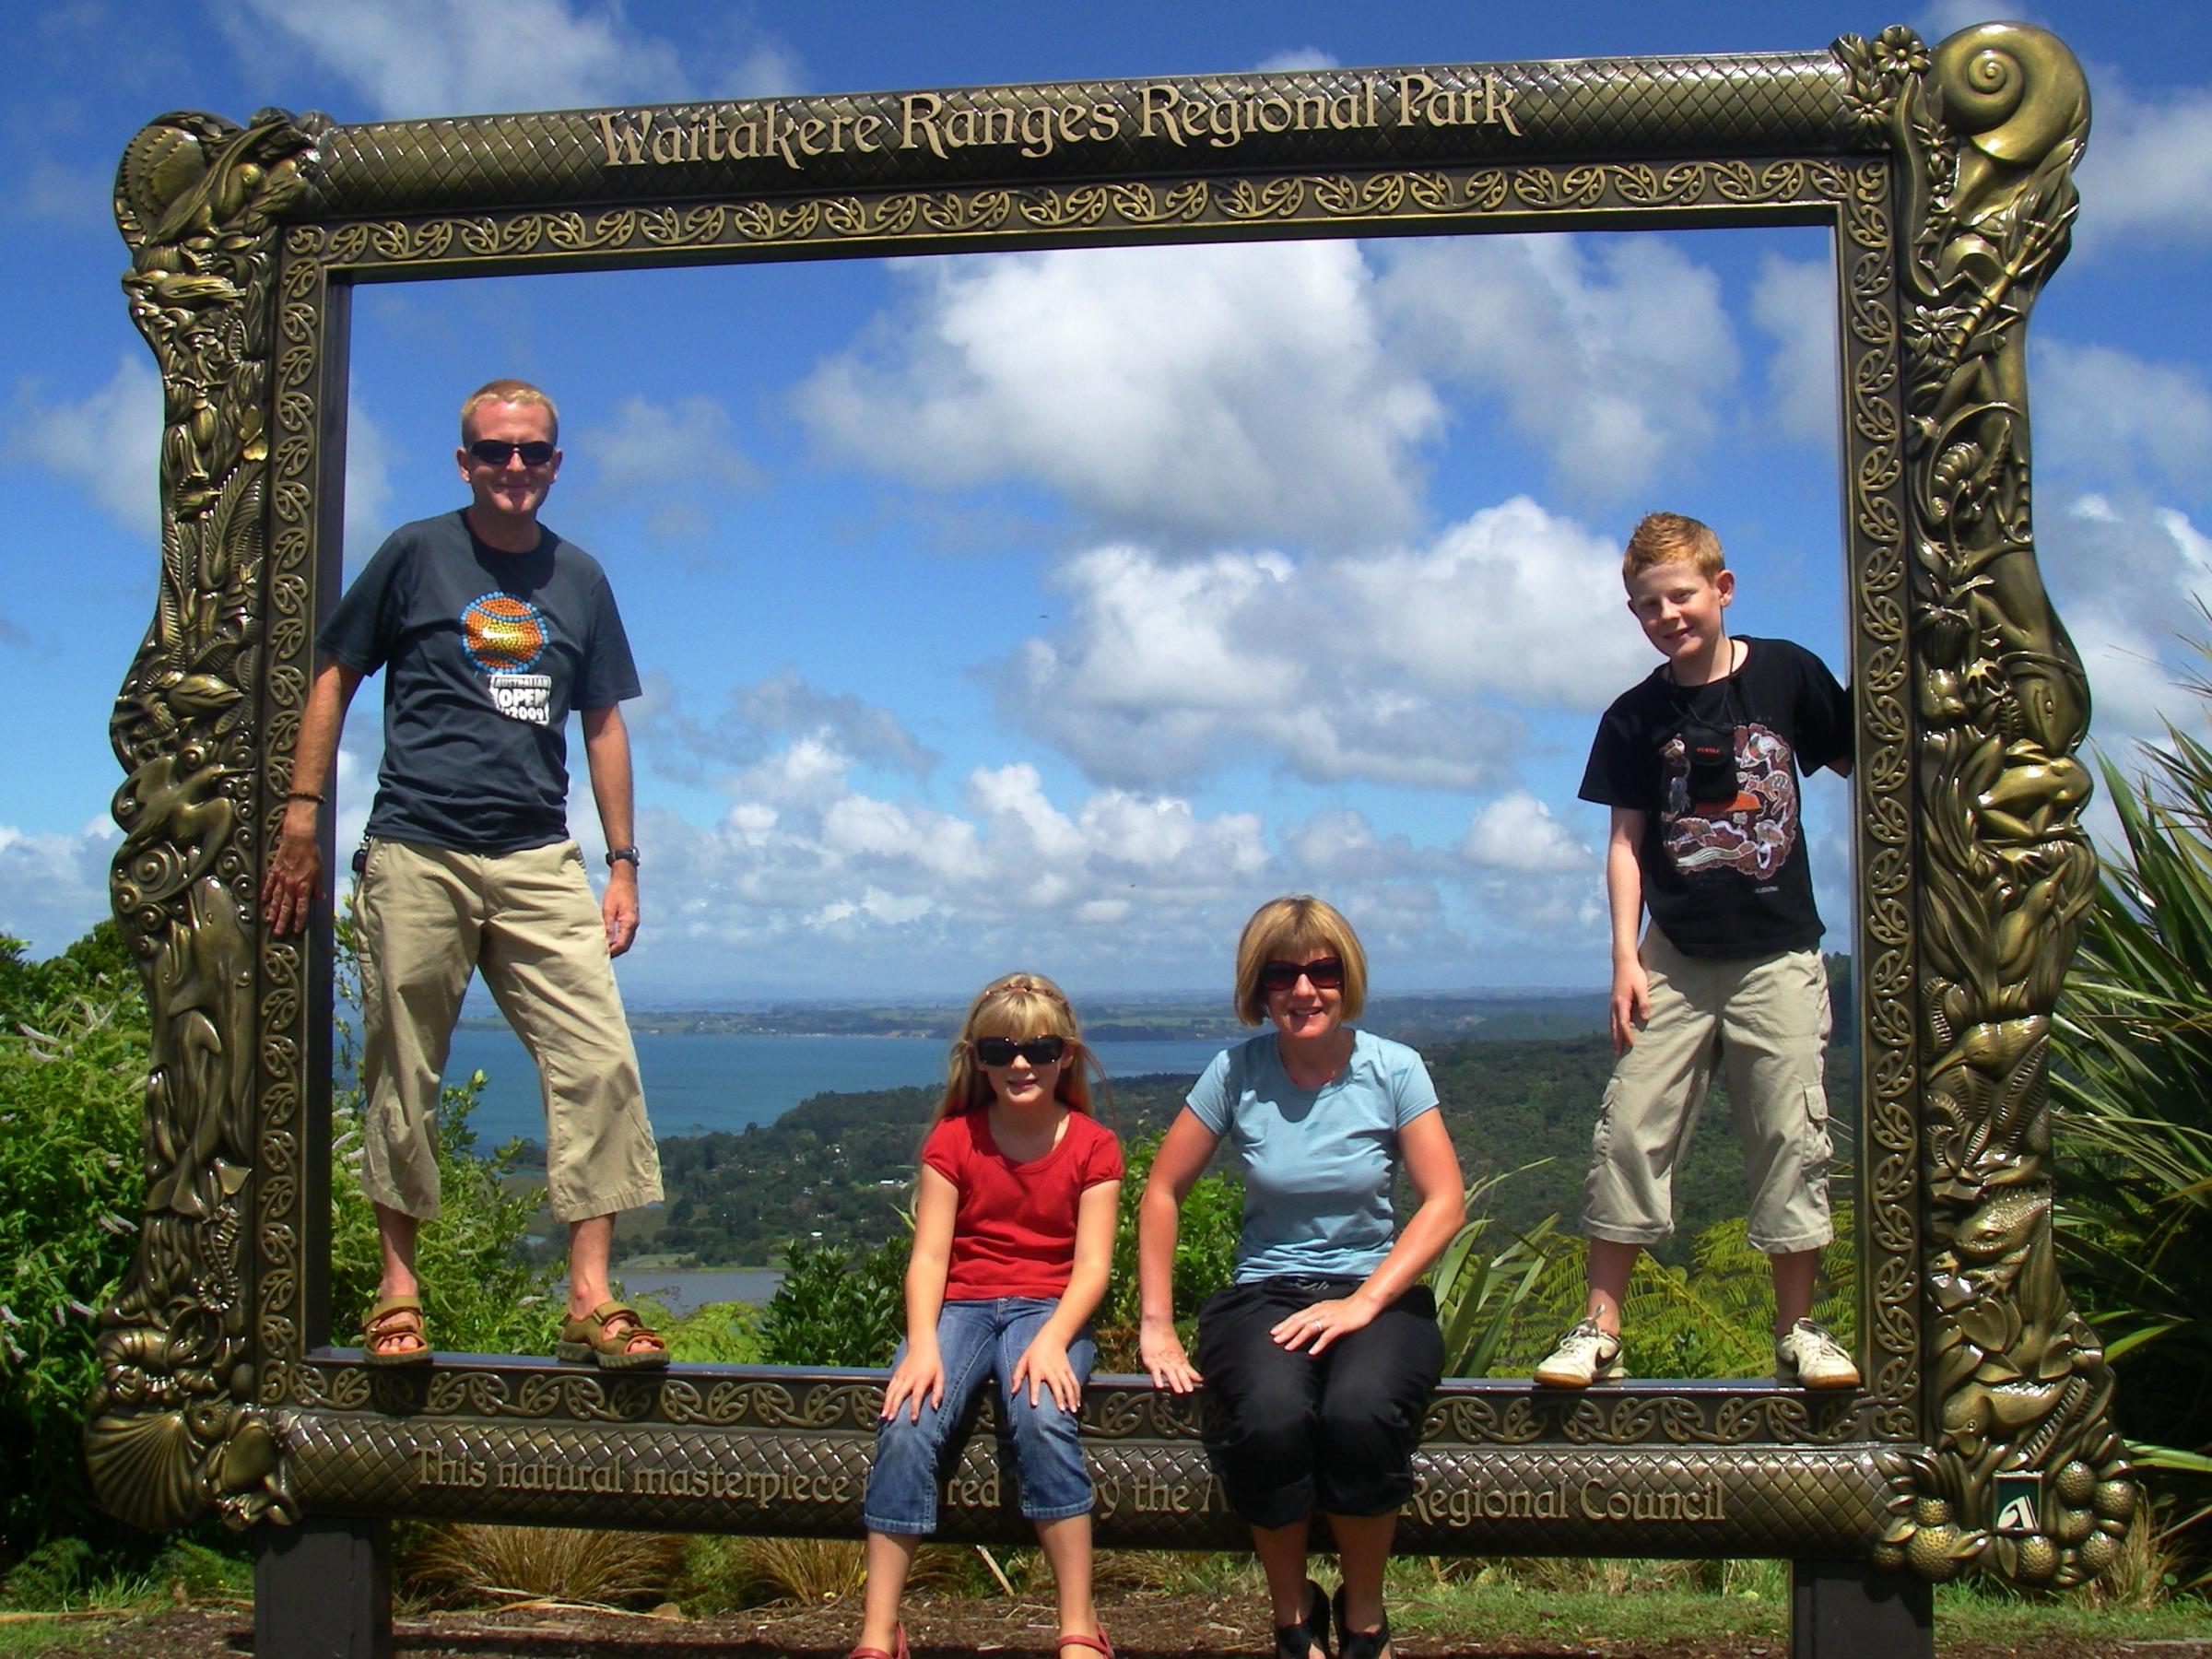 The Pilbeam family visited more than a dozen countries, including stopping off at Waitakere Ranges Regional Park in New Zealand.